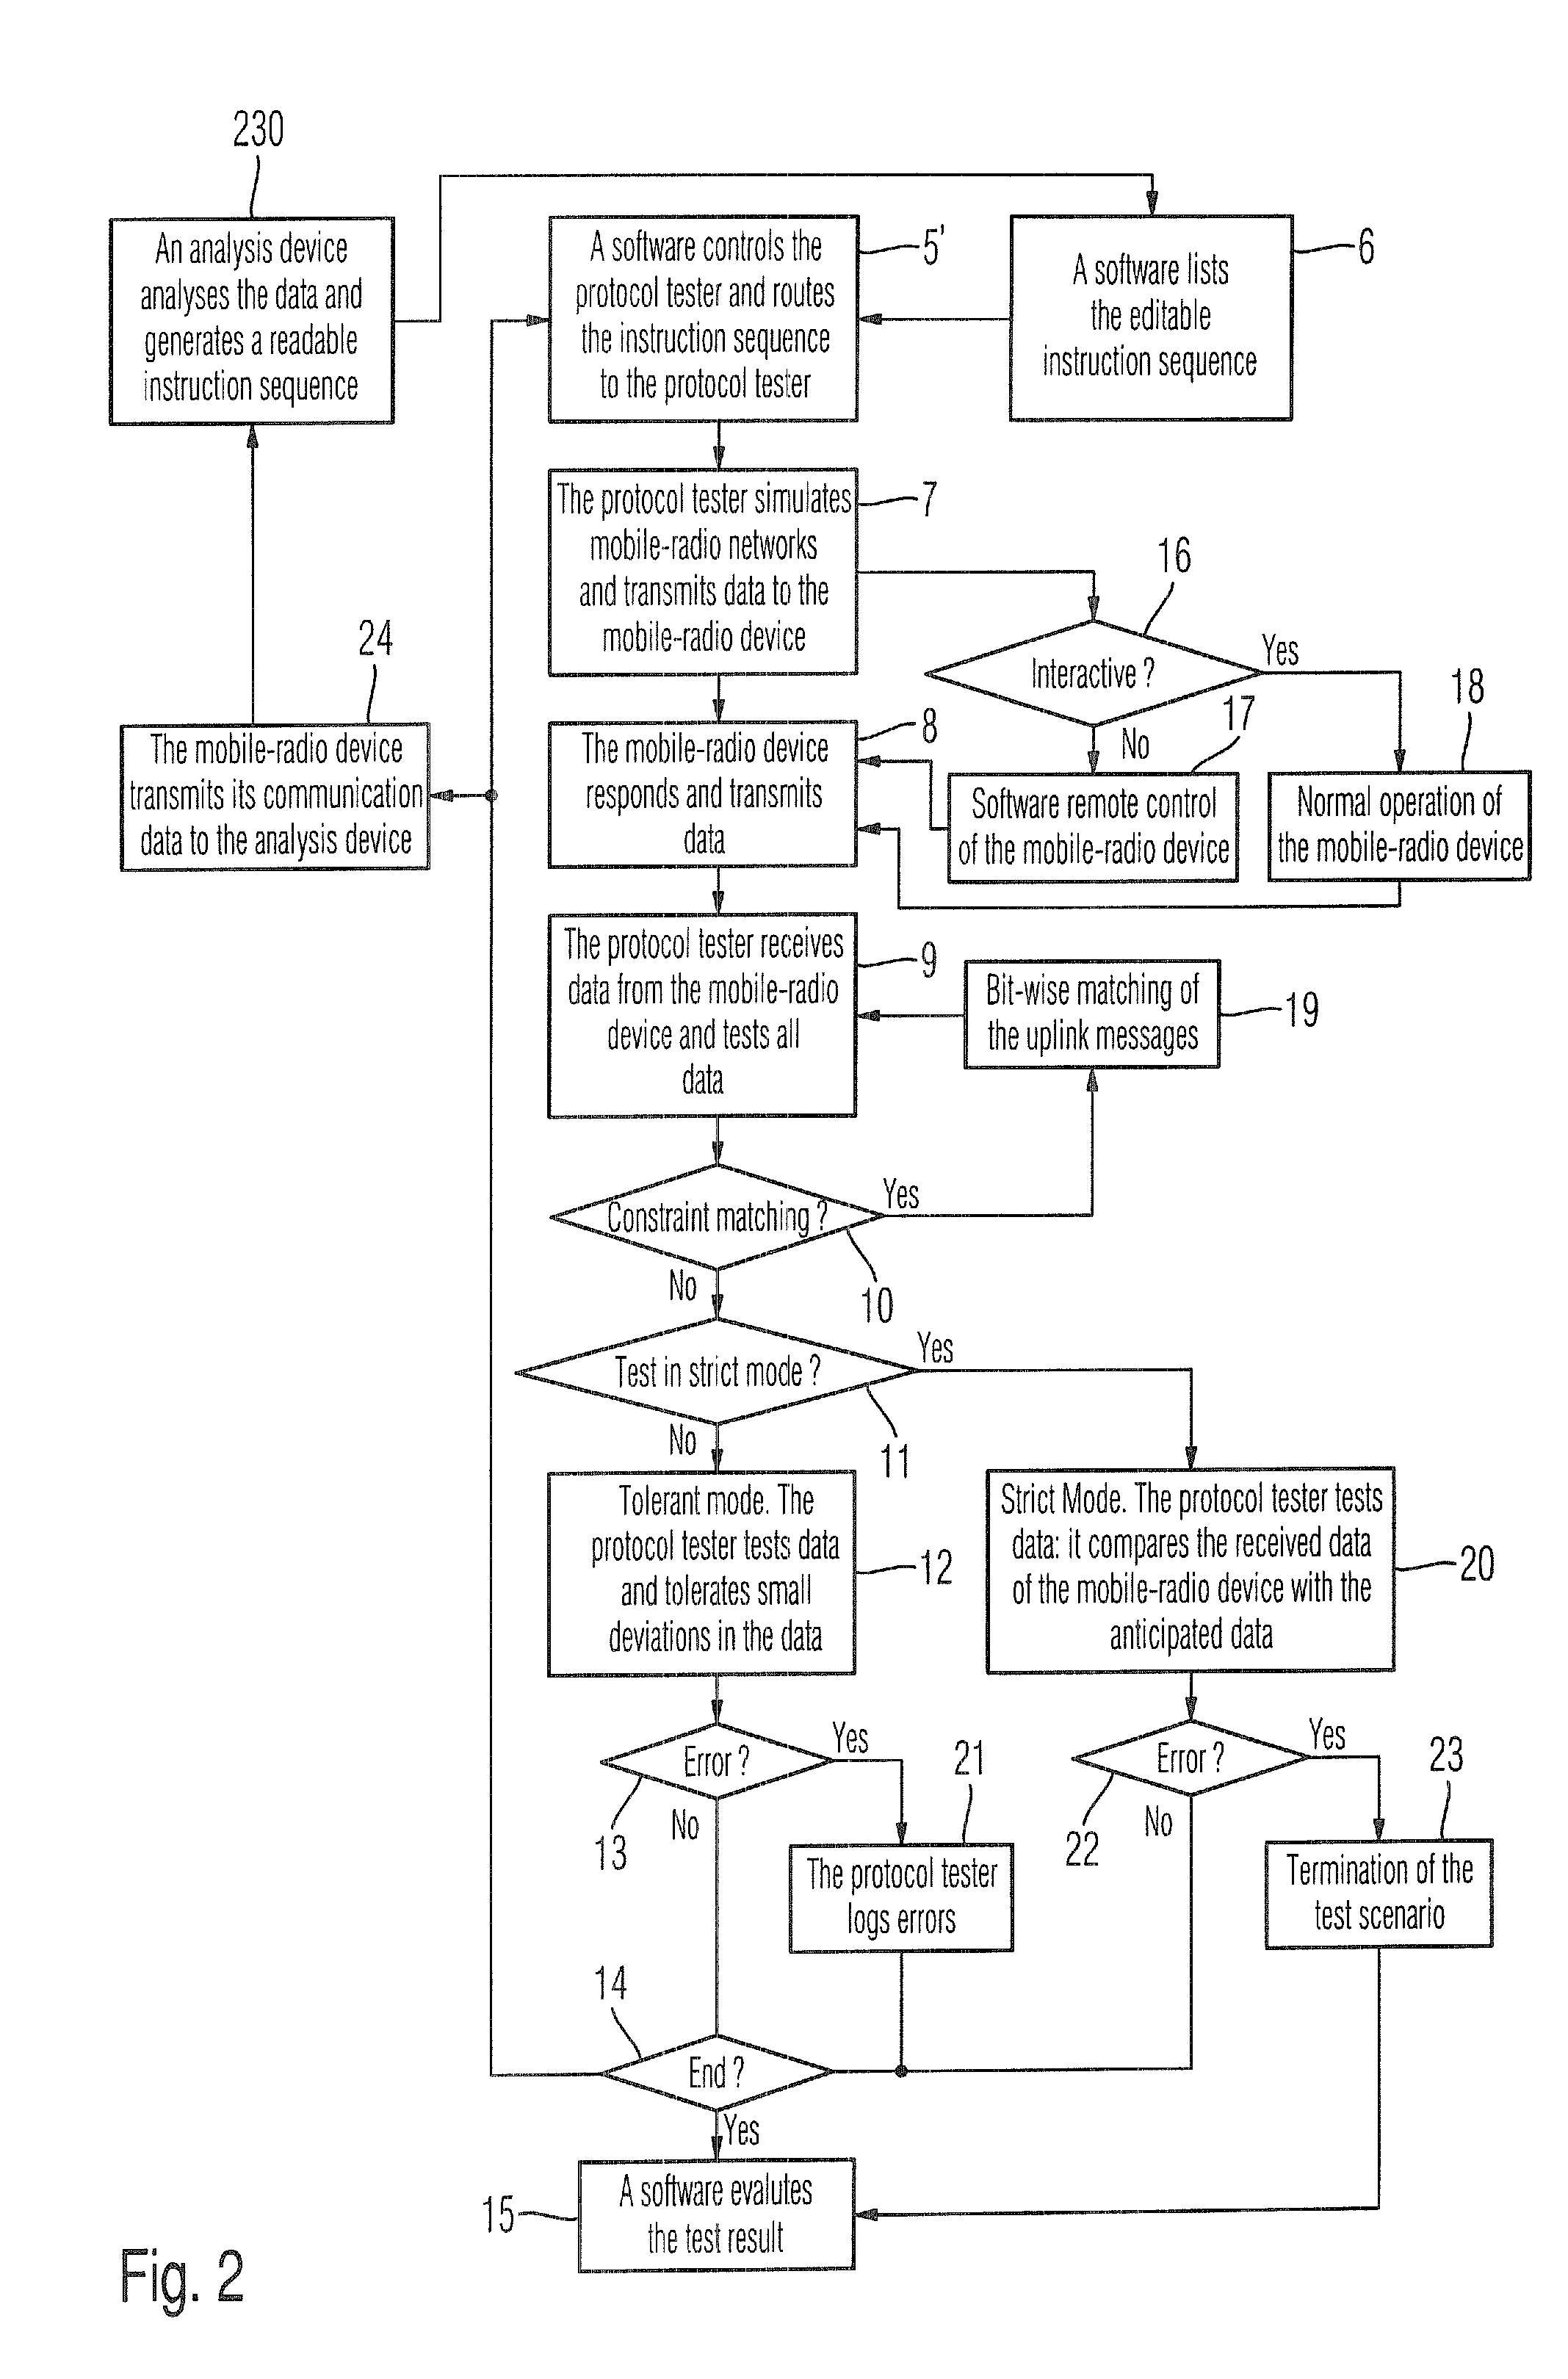 Method for testing a mobile-radio device